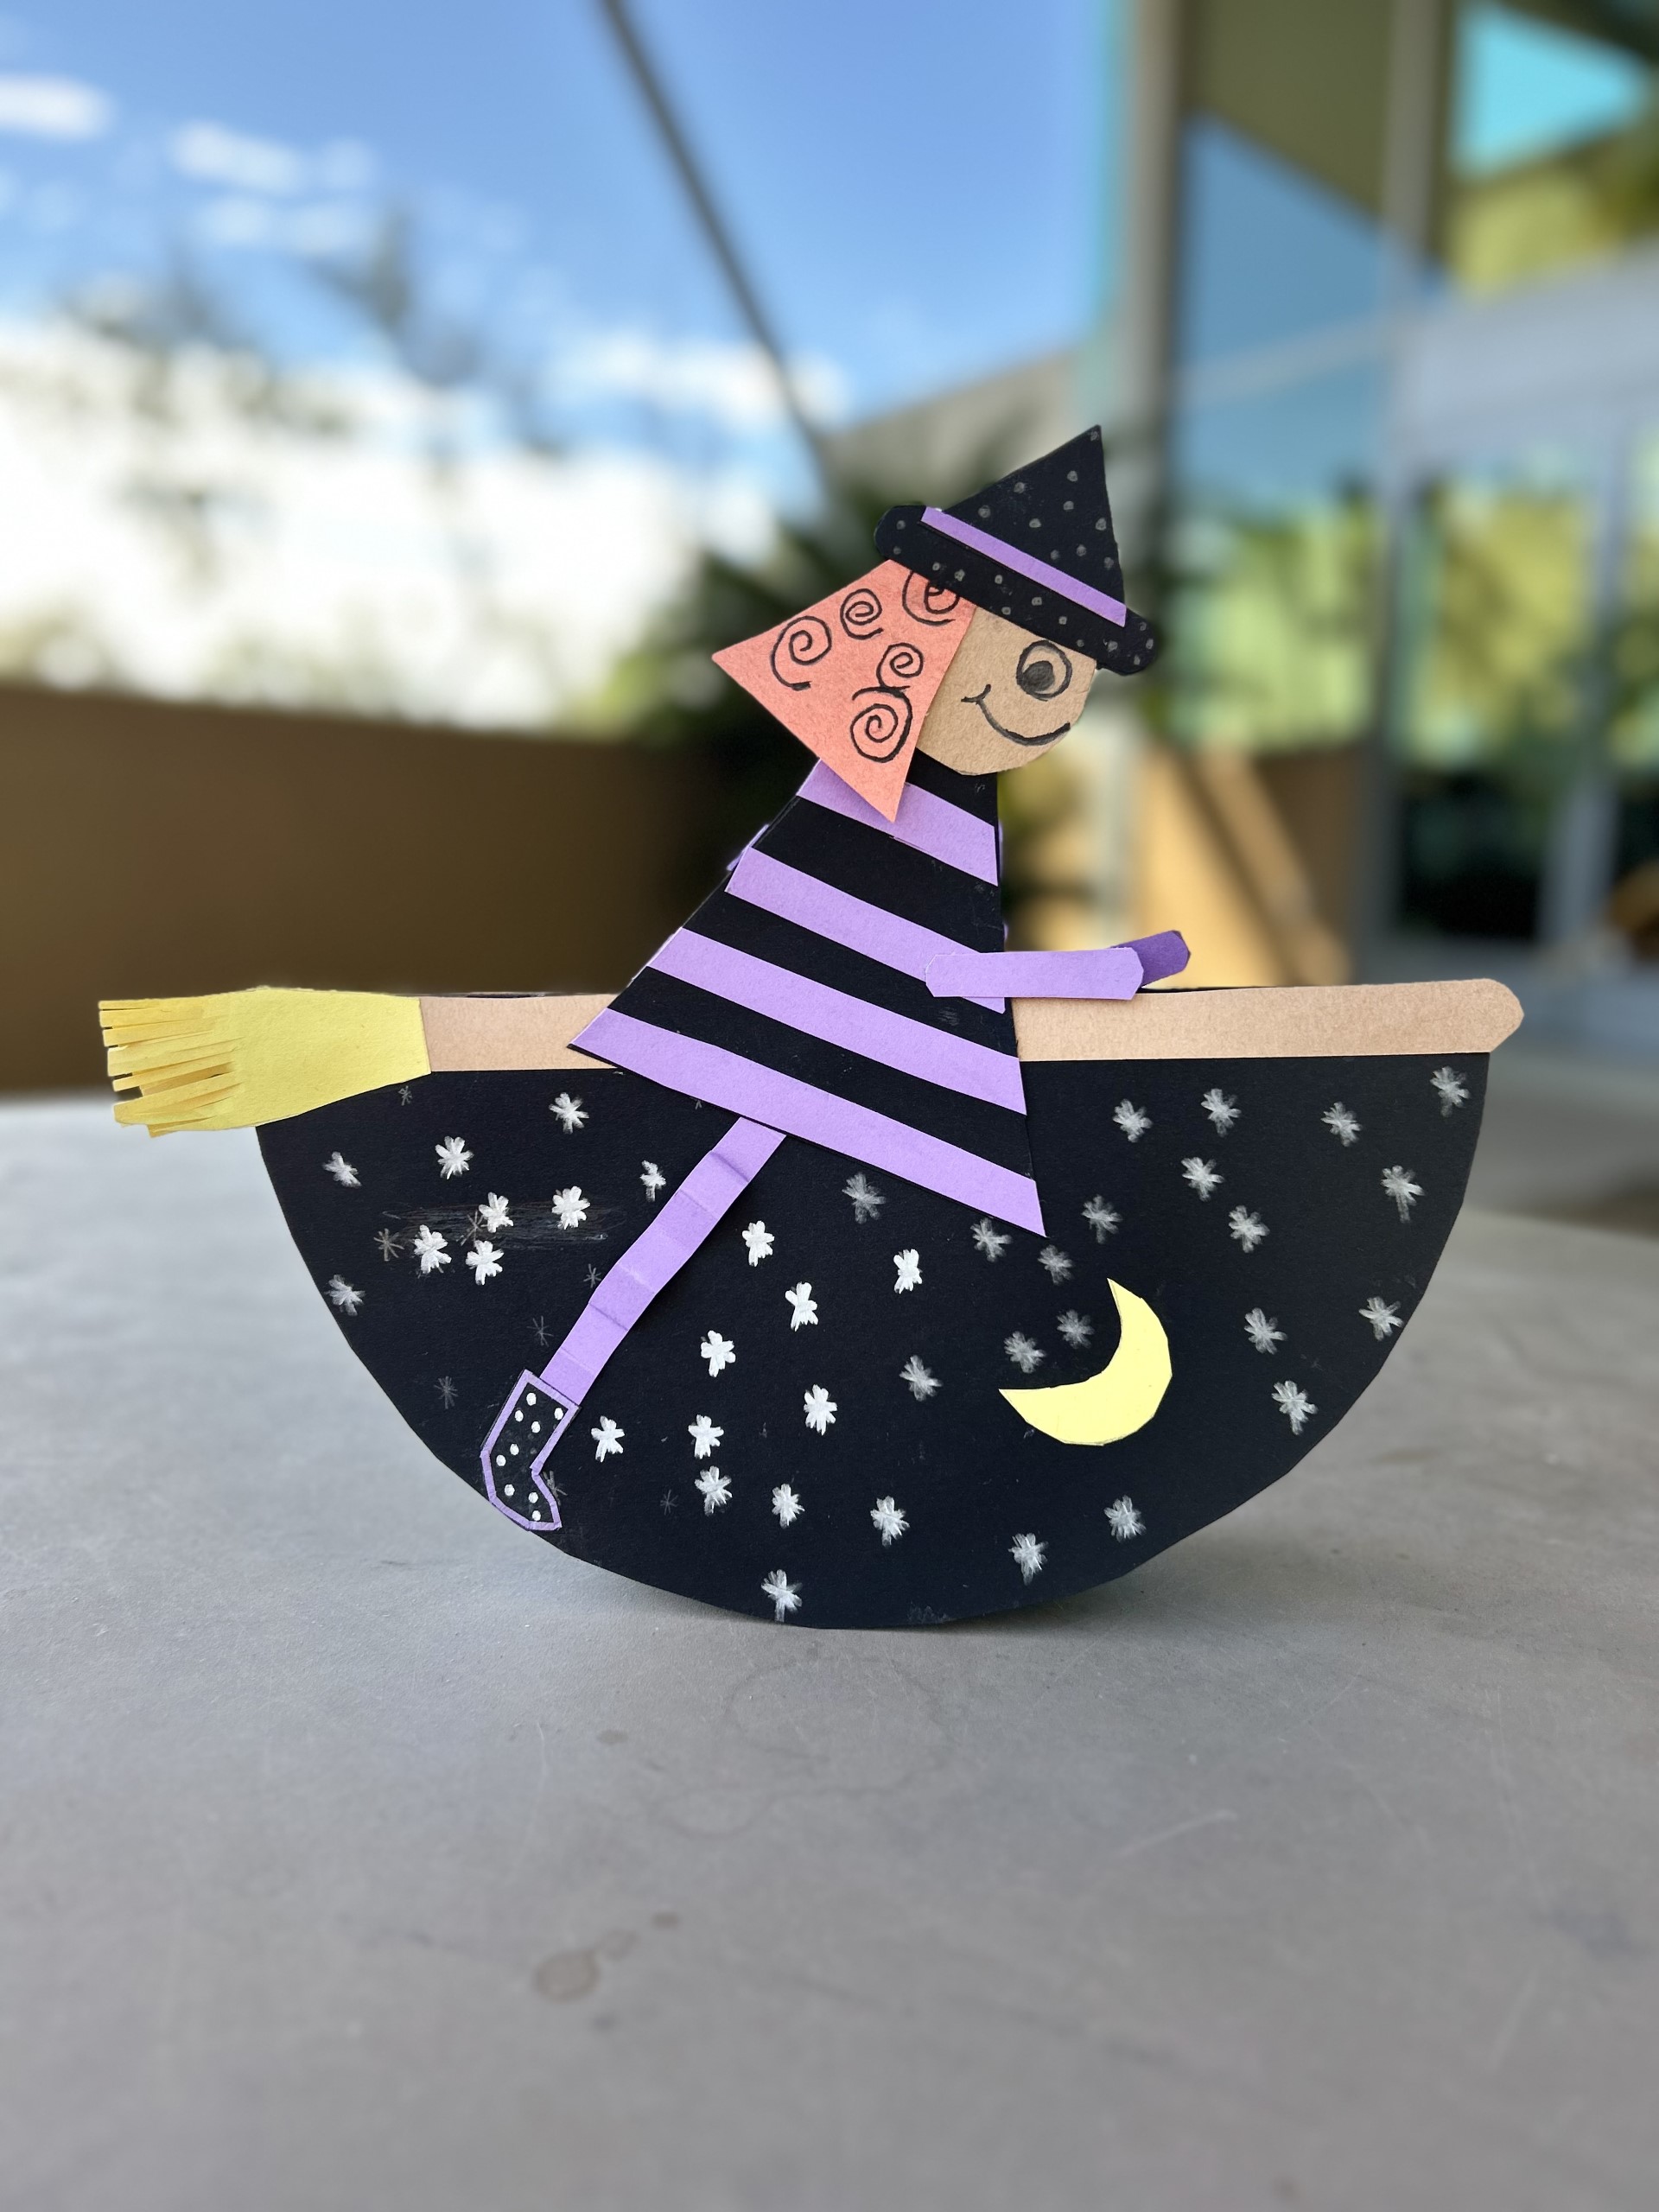 Halloween Arts and Crafts